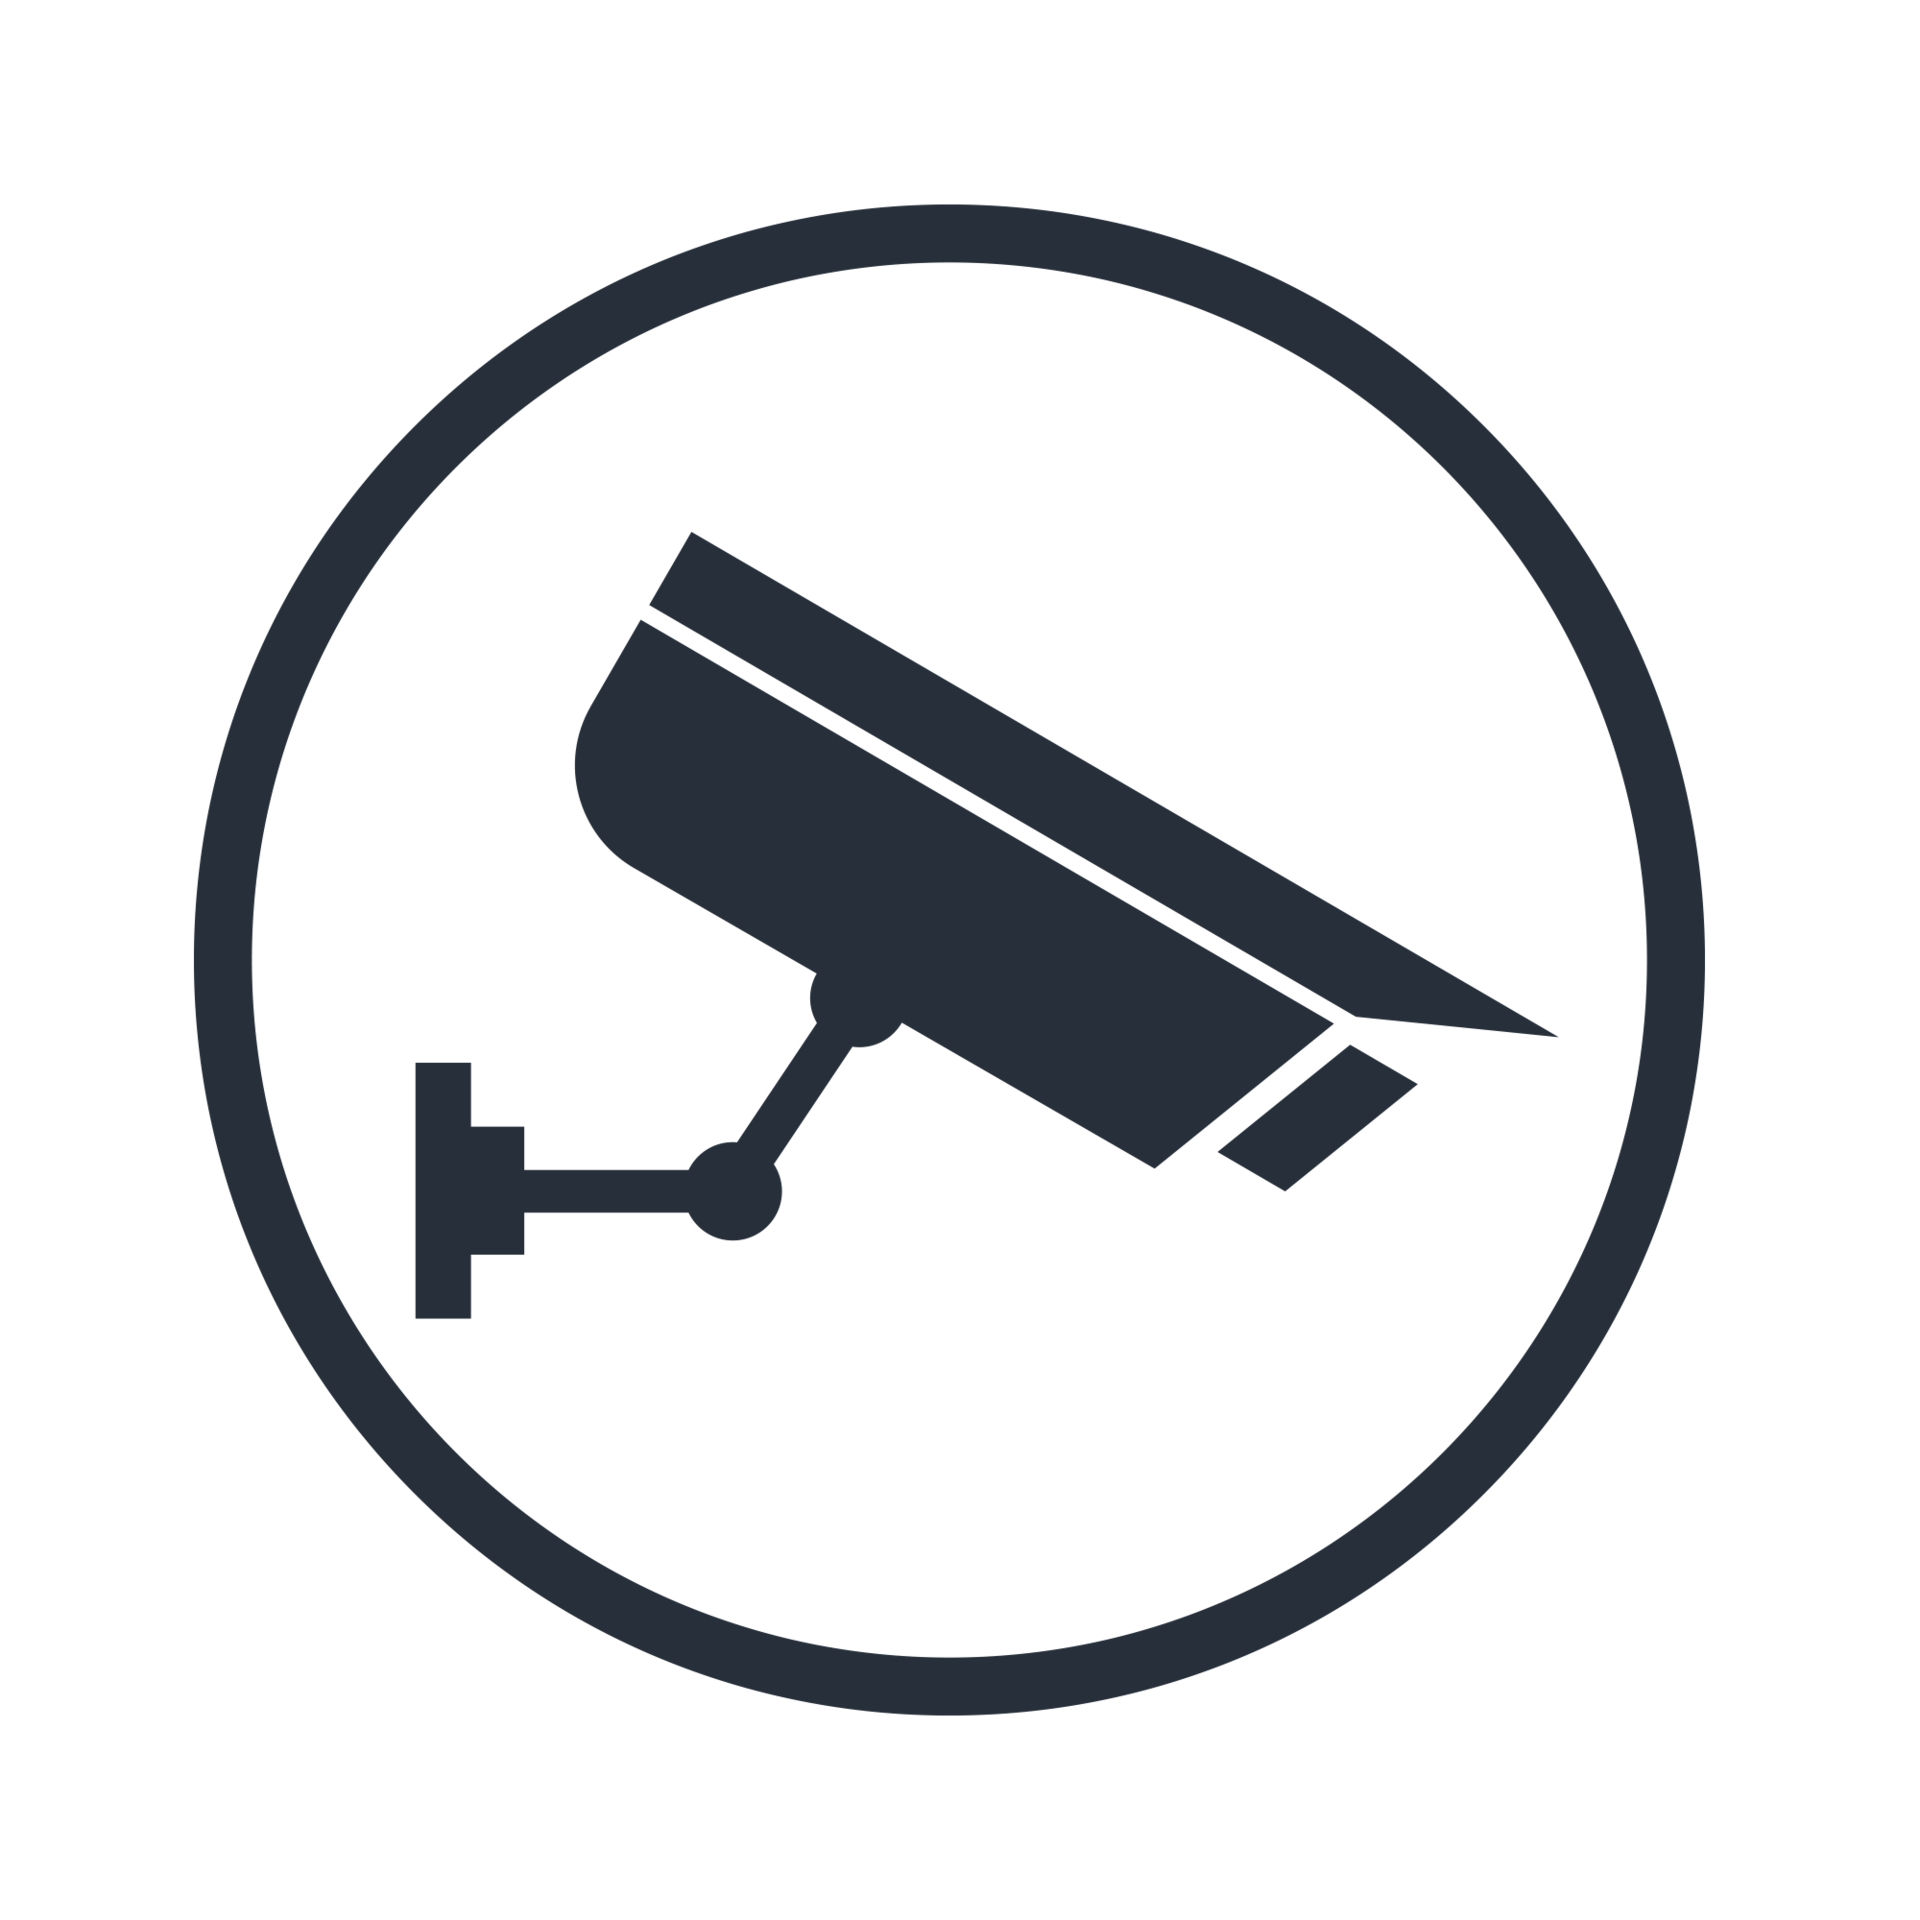 Transparent Background Cctv Camera Icon Png PNG